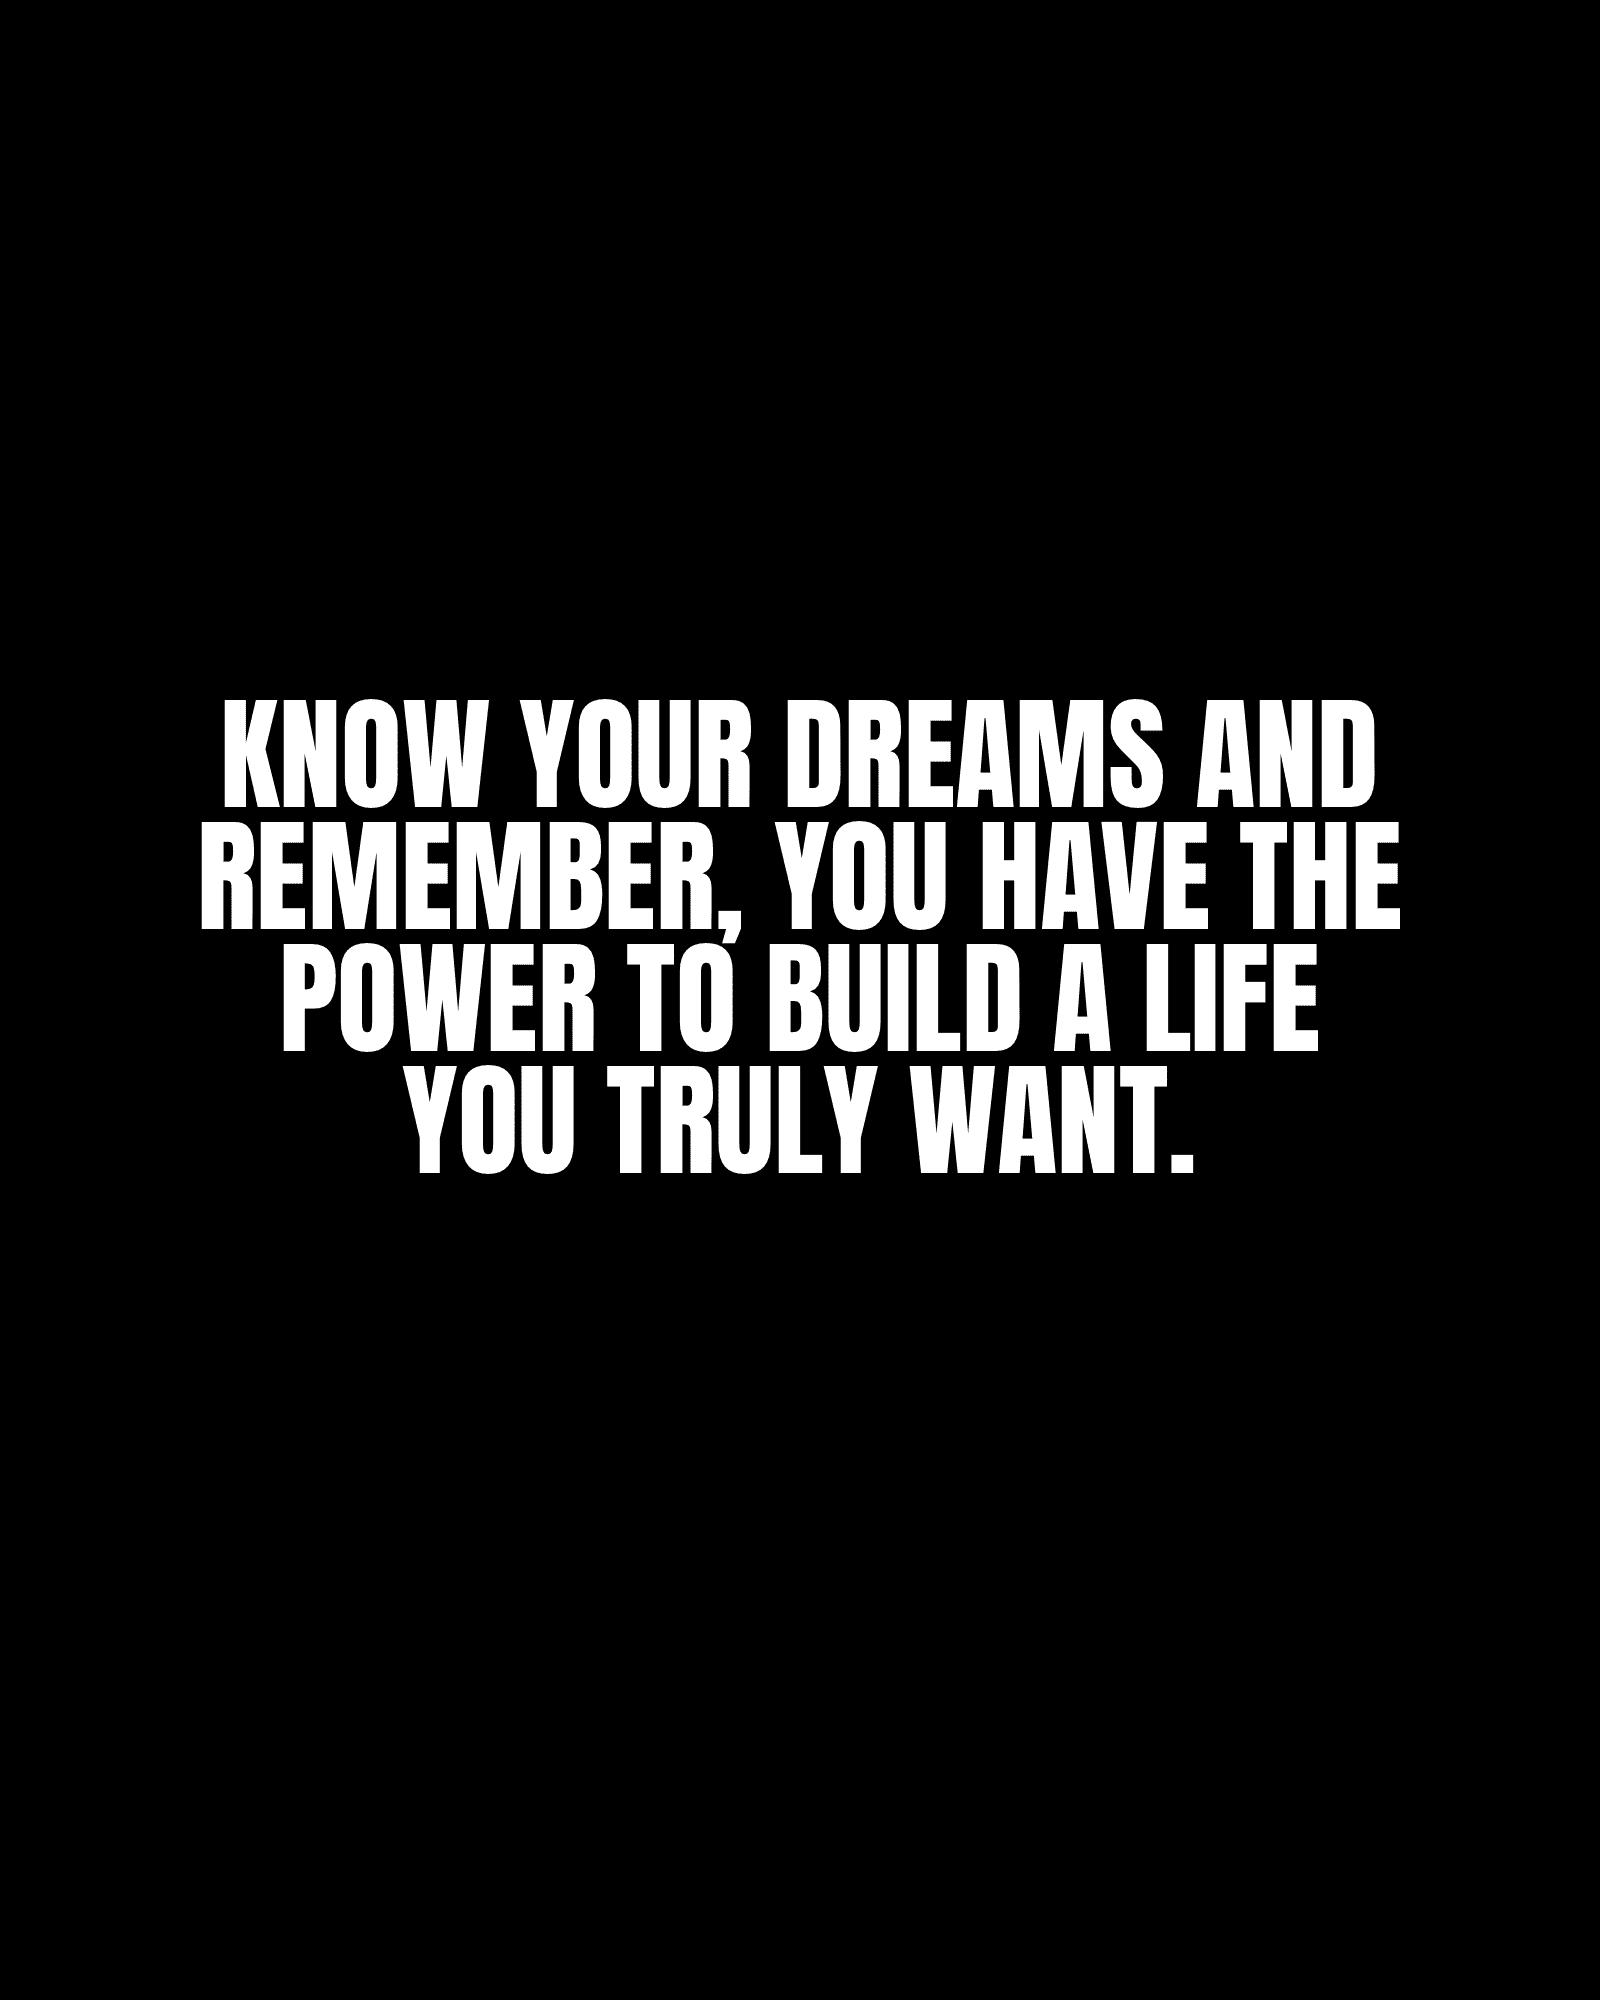 Know your dreams and remember, you have the power to build a life you truly want.